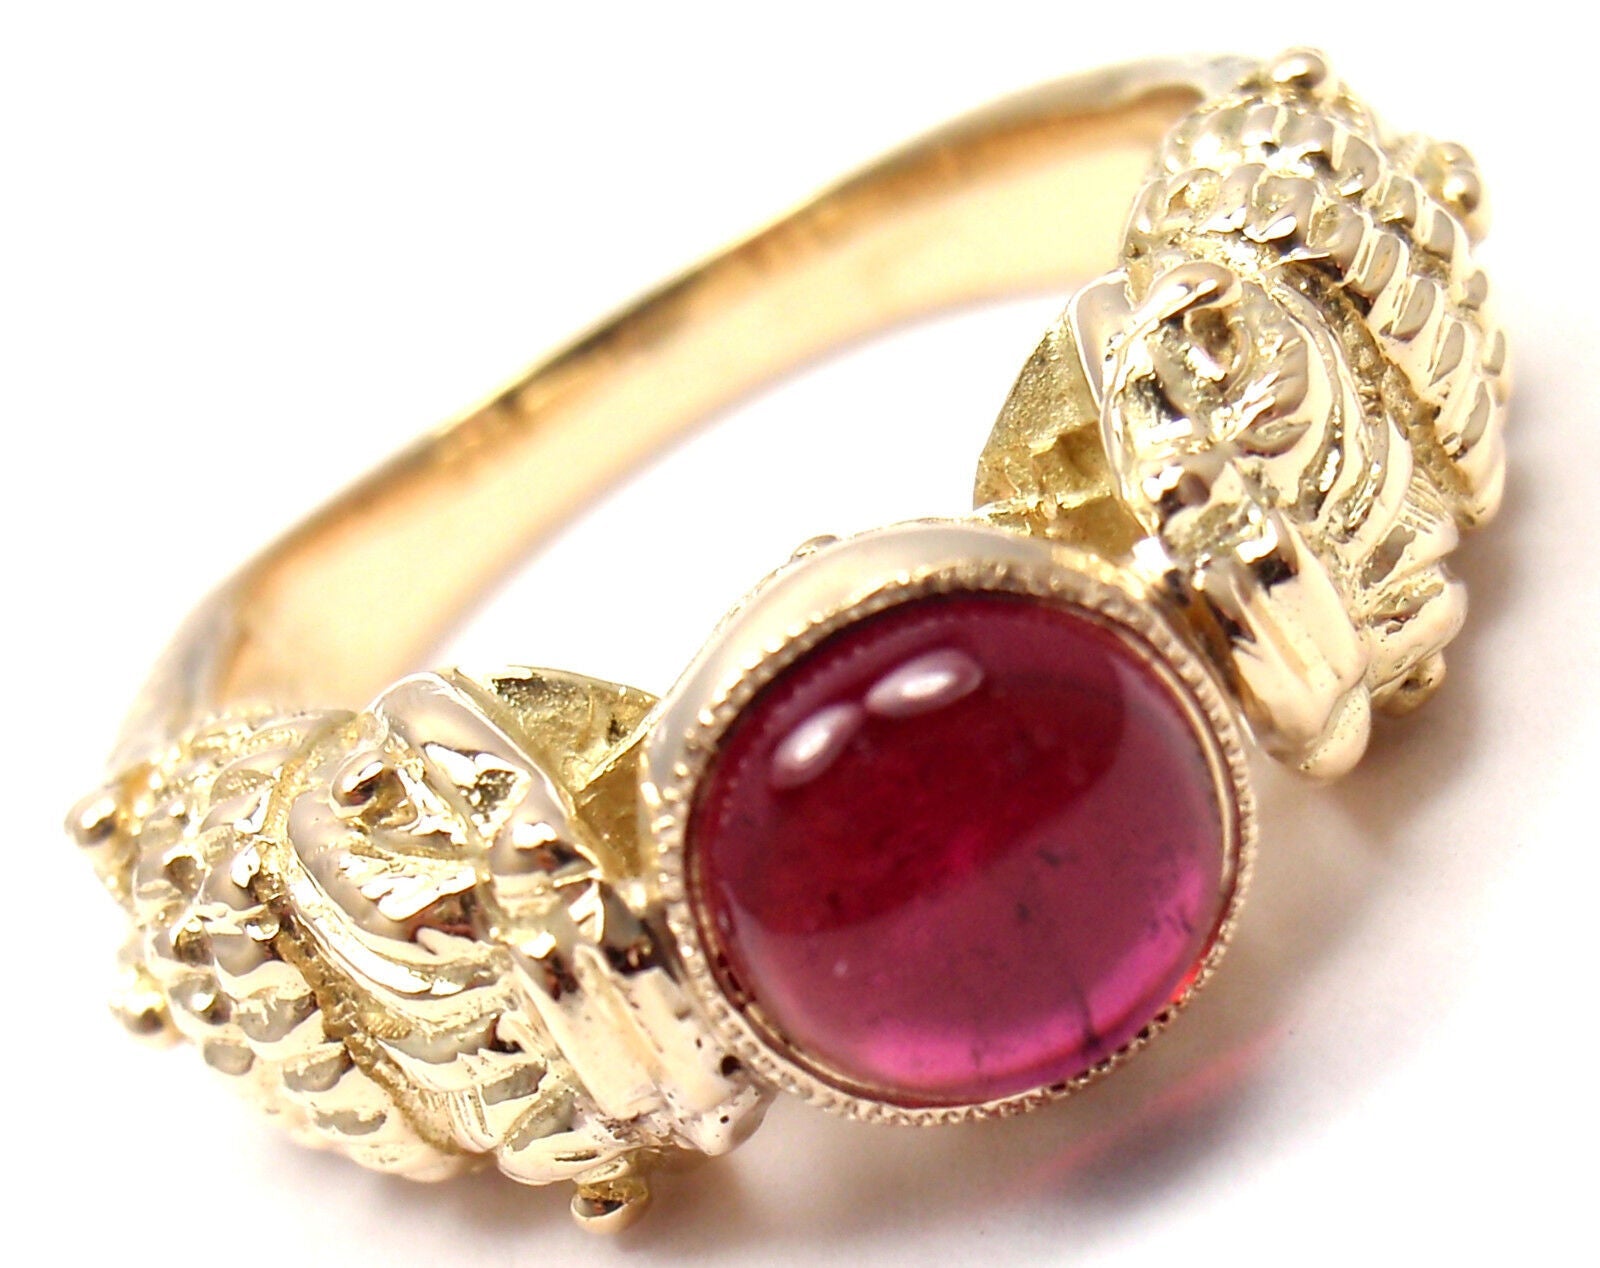 Zolotas Jewelry & Watches:Fine Jewelry:Rings Very Rare! Authentic Zolotas Greece 18k Yellow Gold Pink Tourmaline Band Ring